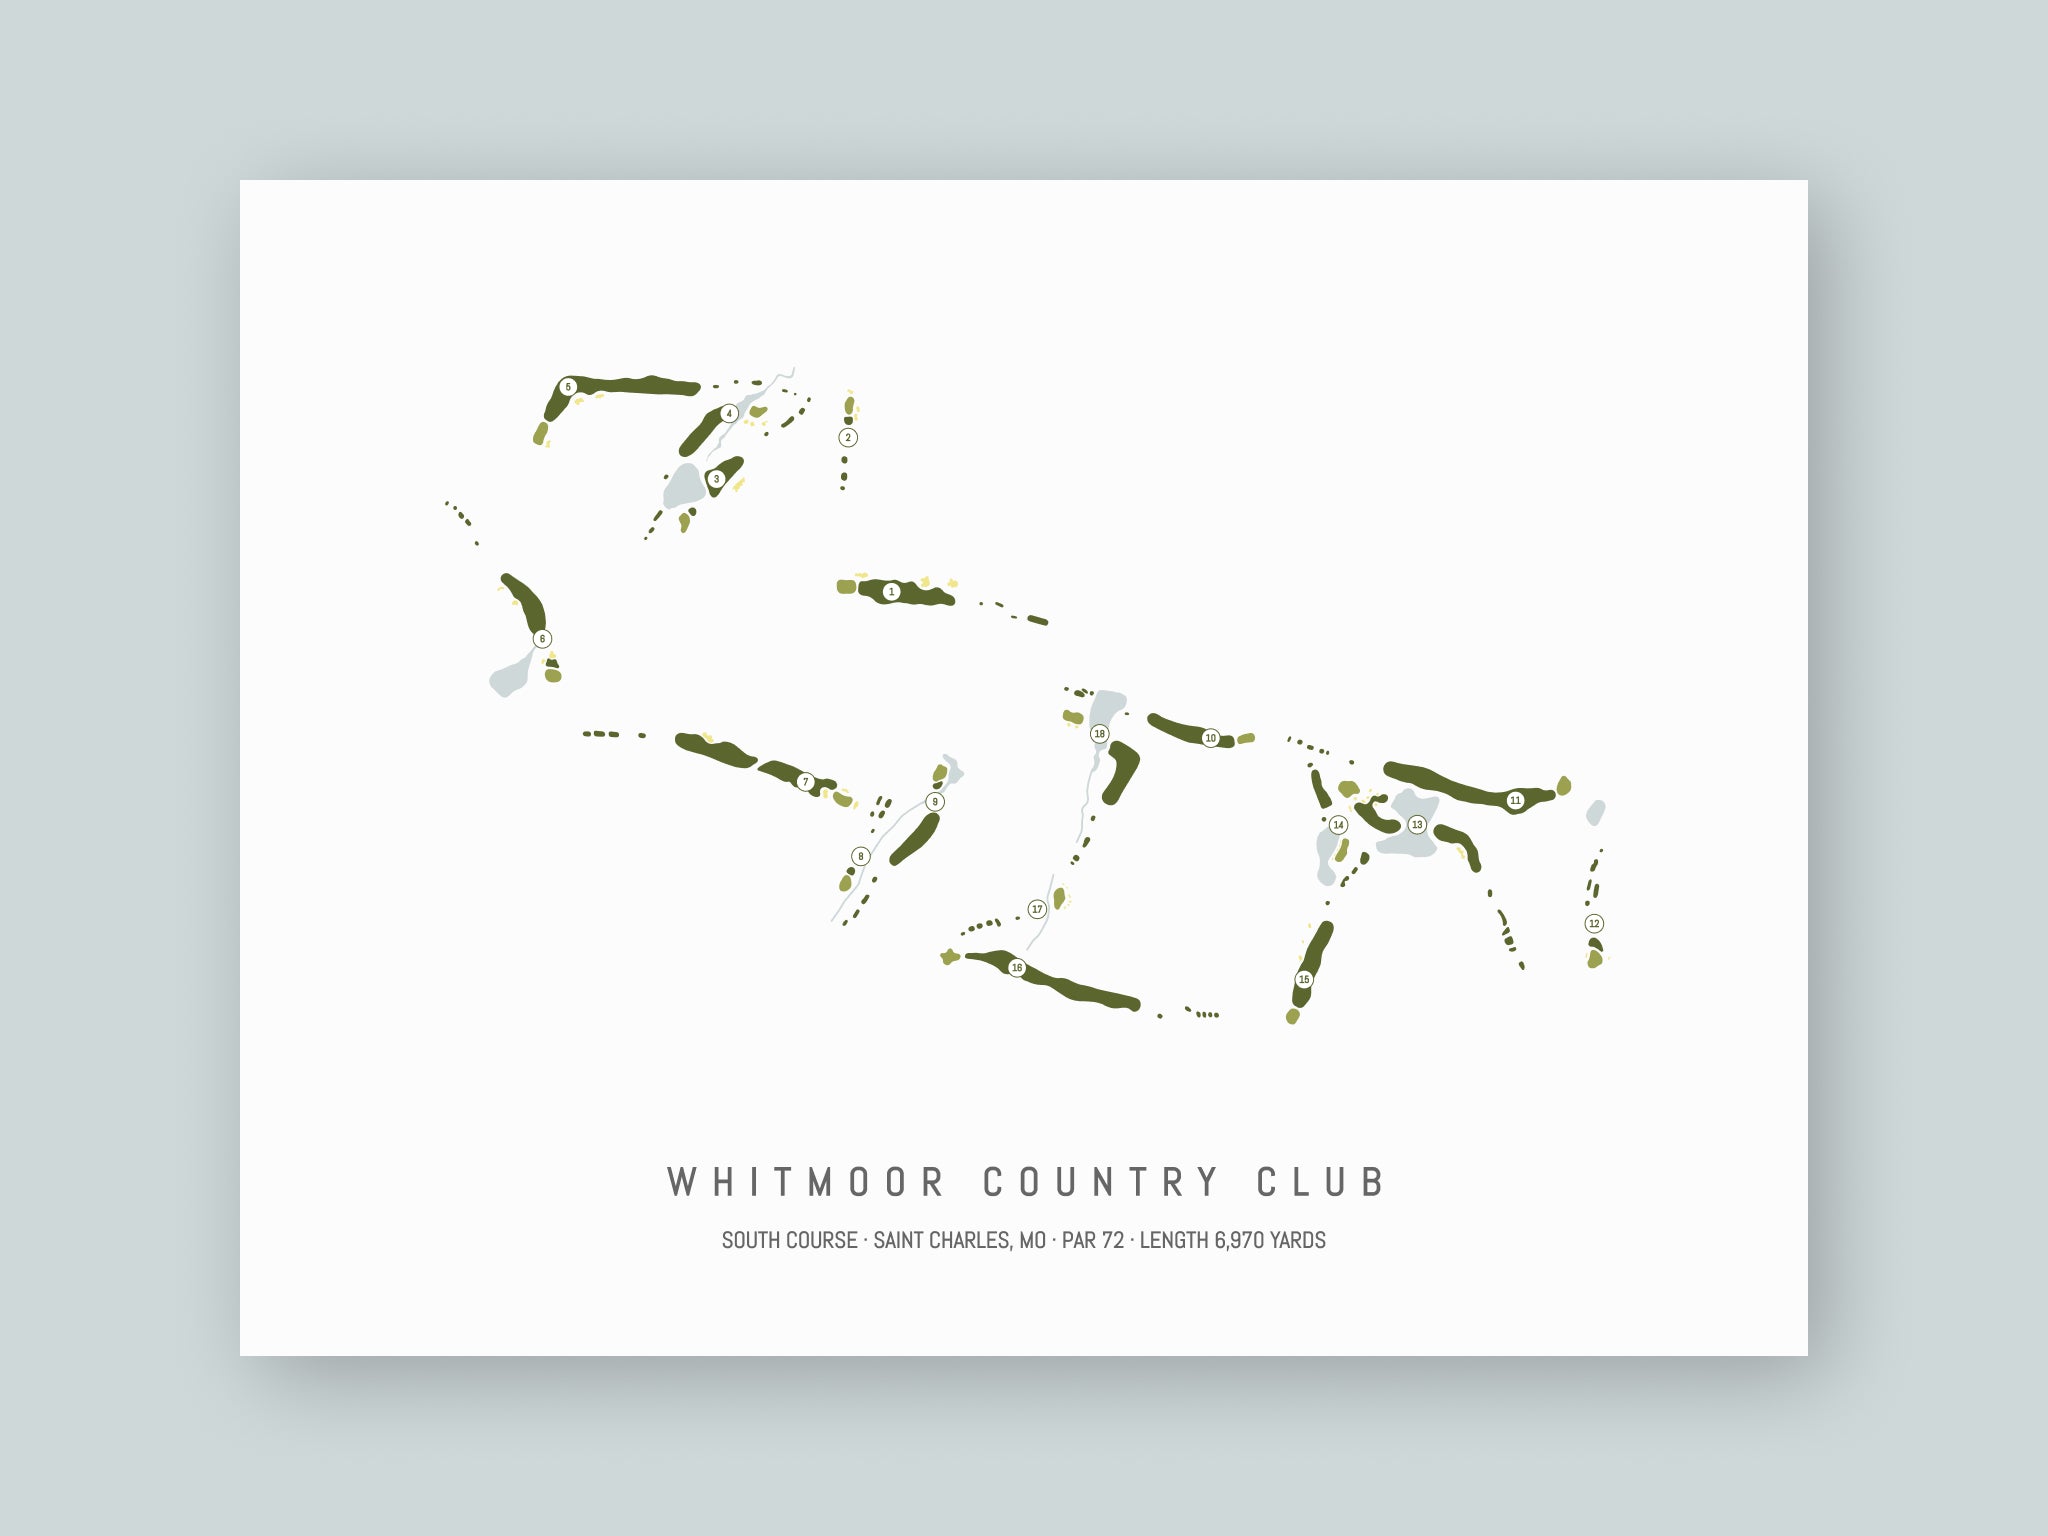 Whitmoor Country Club - South Course